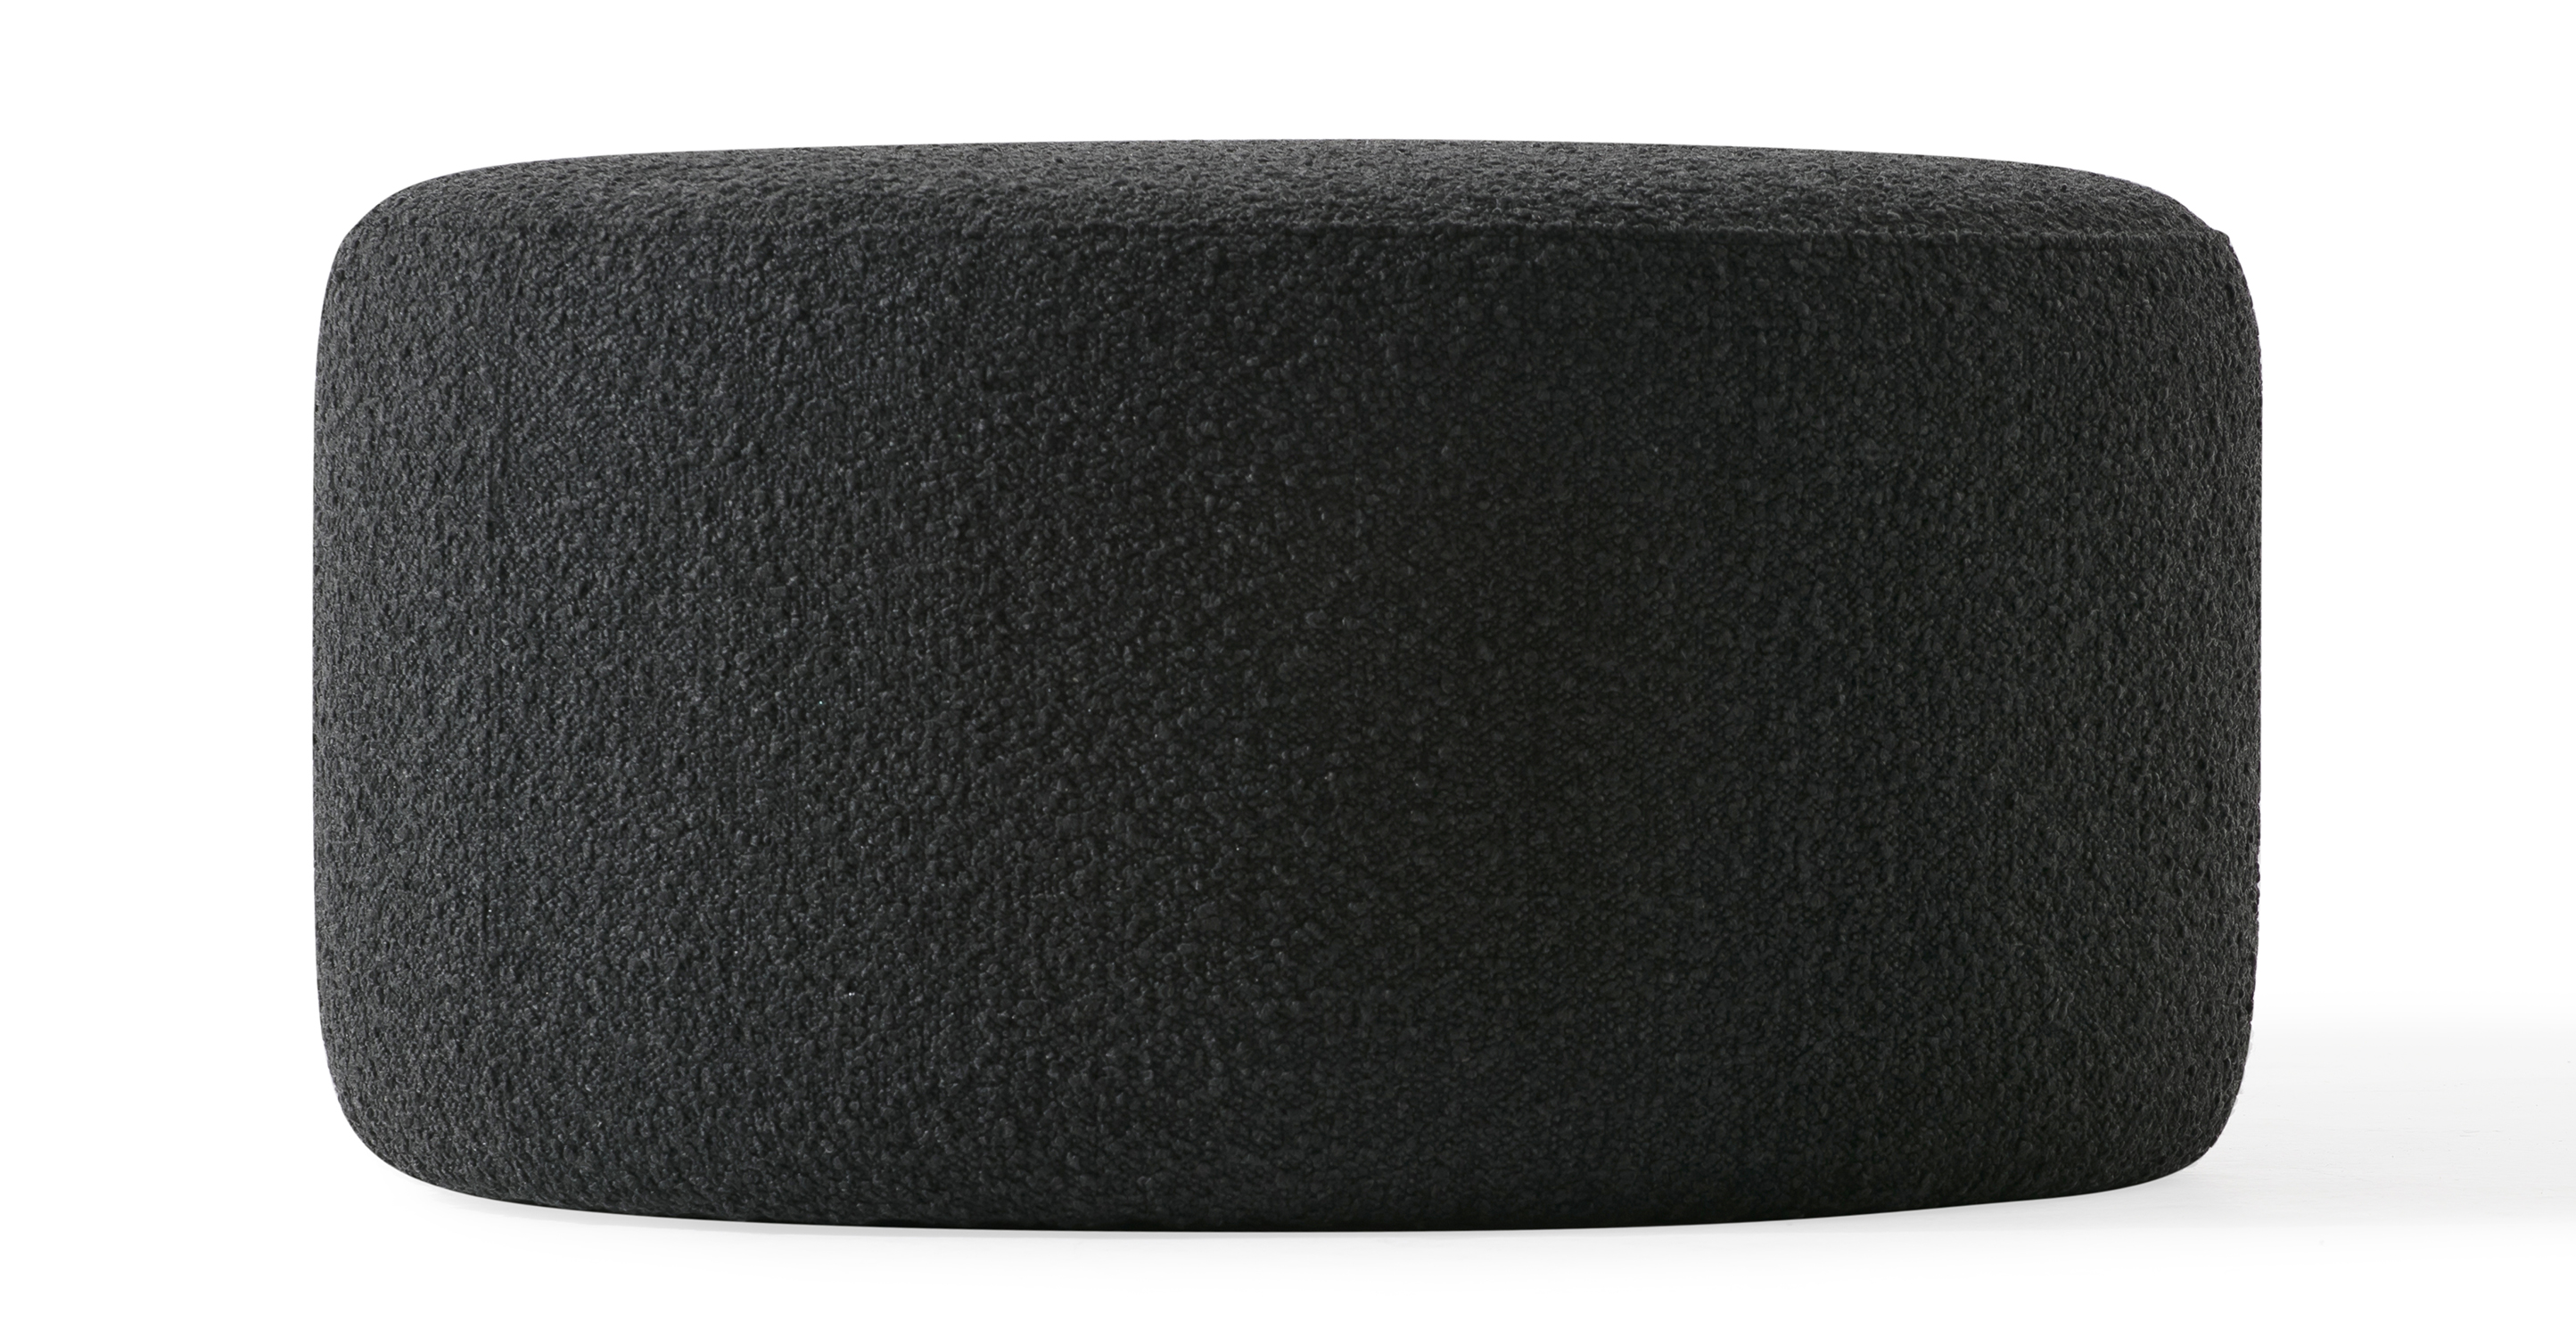 The Spool Nior Dark Grey Boucle ottoman is a 100% upholstered modern round ottoman that is more flat on top to allow it to cross over to a coffee table and seating option. There is an edge piping along the top circle. Style is simplistic, modern, and sophisticated.